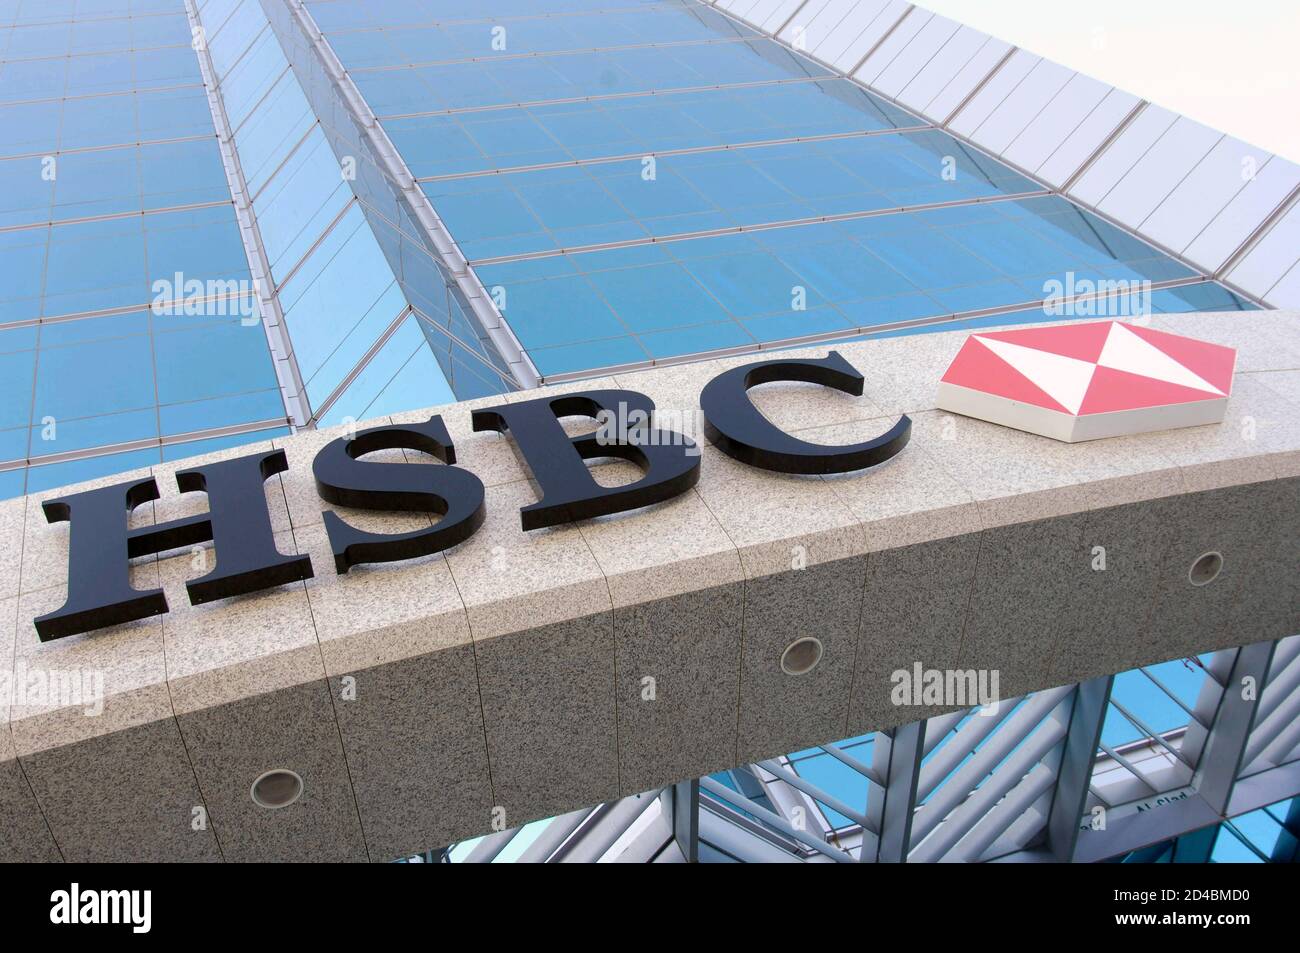 A newly erected signboard for the first HSBC bank branch is seen in Kuwait September 28, 2005 after a 30 year absence. The bank will officially open its first branch in Kuwait on October 2, 2005 after the Kuwait Council of ministers granted it a foreign bank licence on February 28, 2005. HSBC will focus on corporate banking, trade and private banking services. REUTERS/Stephanie McGehee Stock Photo